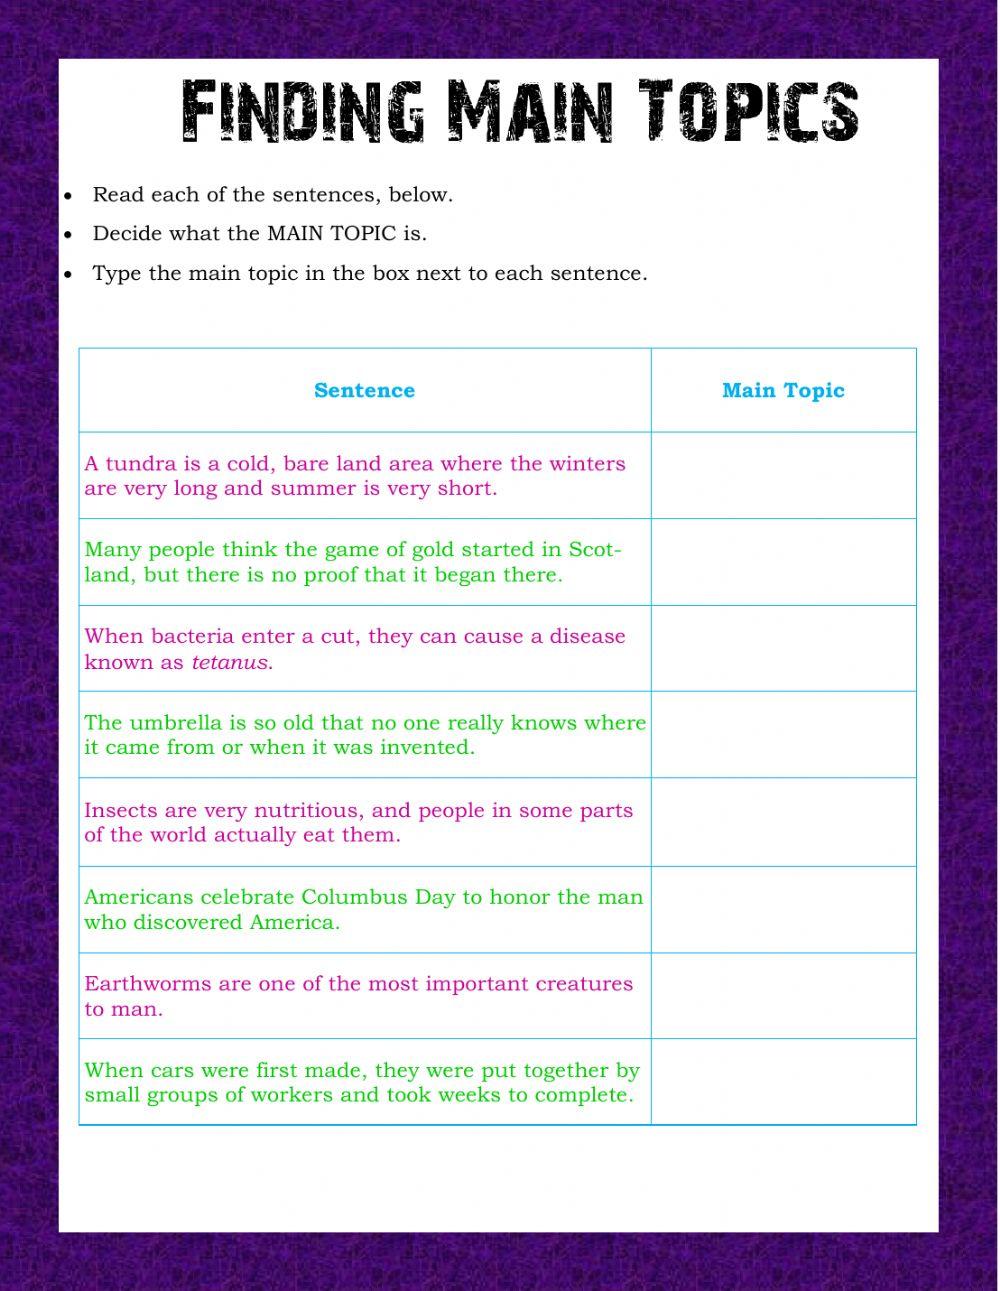 Outlining - Finding Main Topics in Sentences